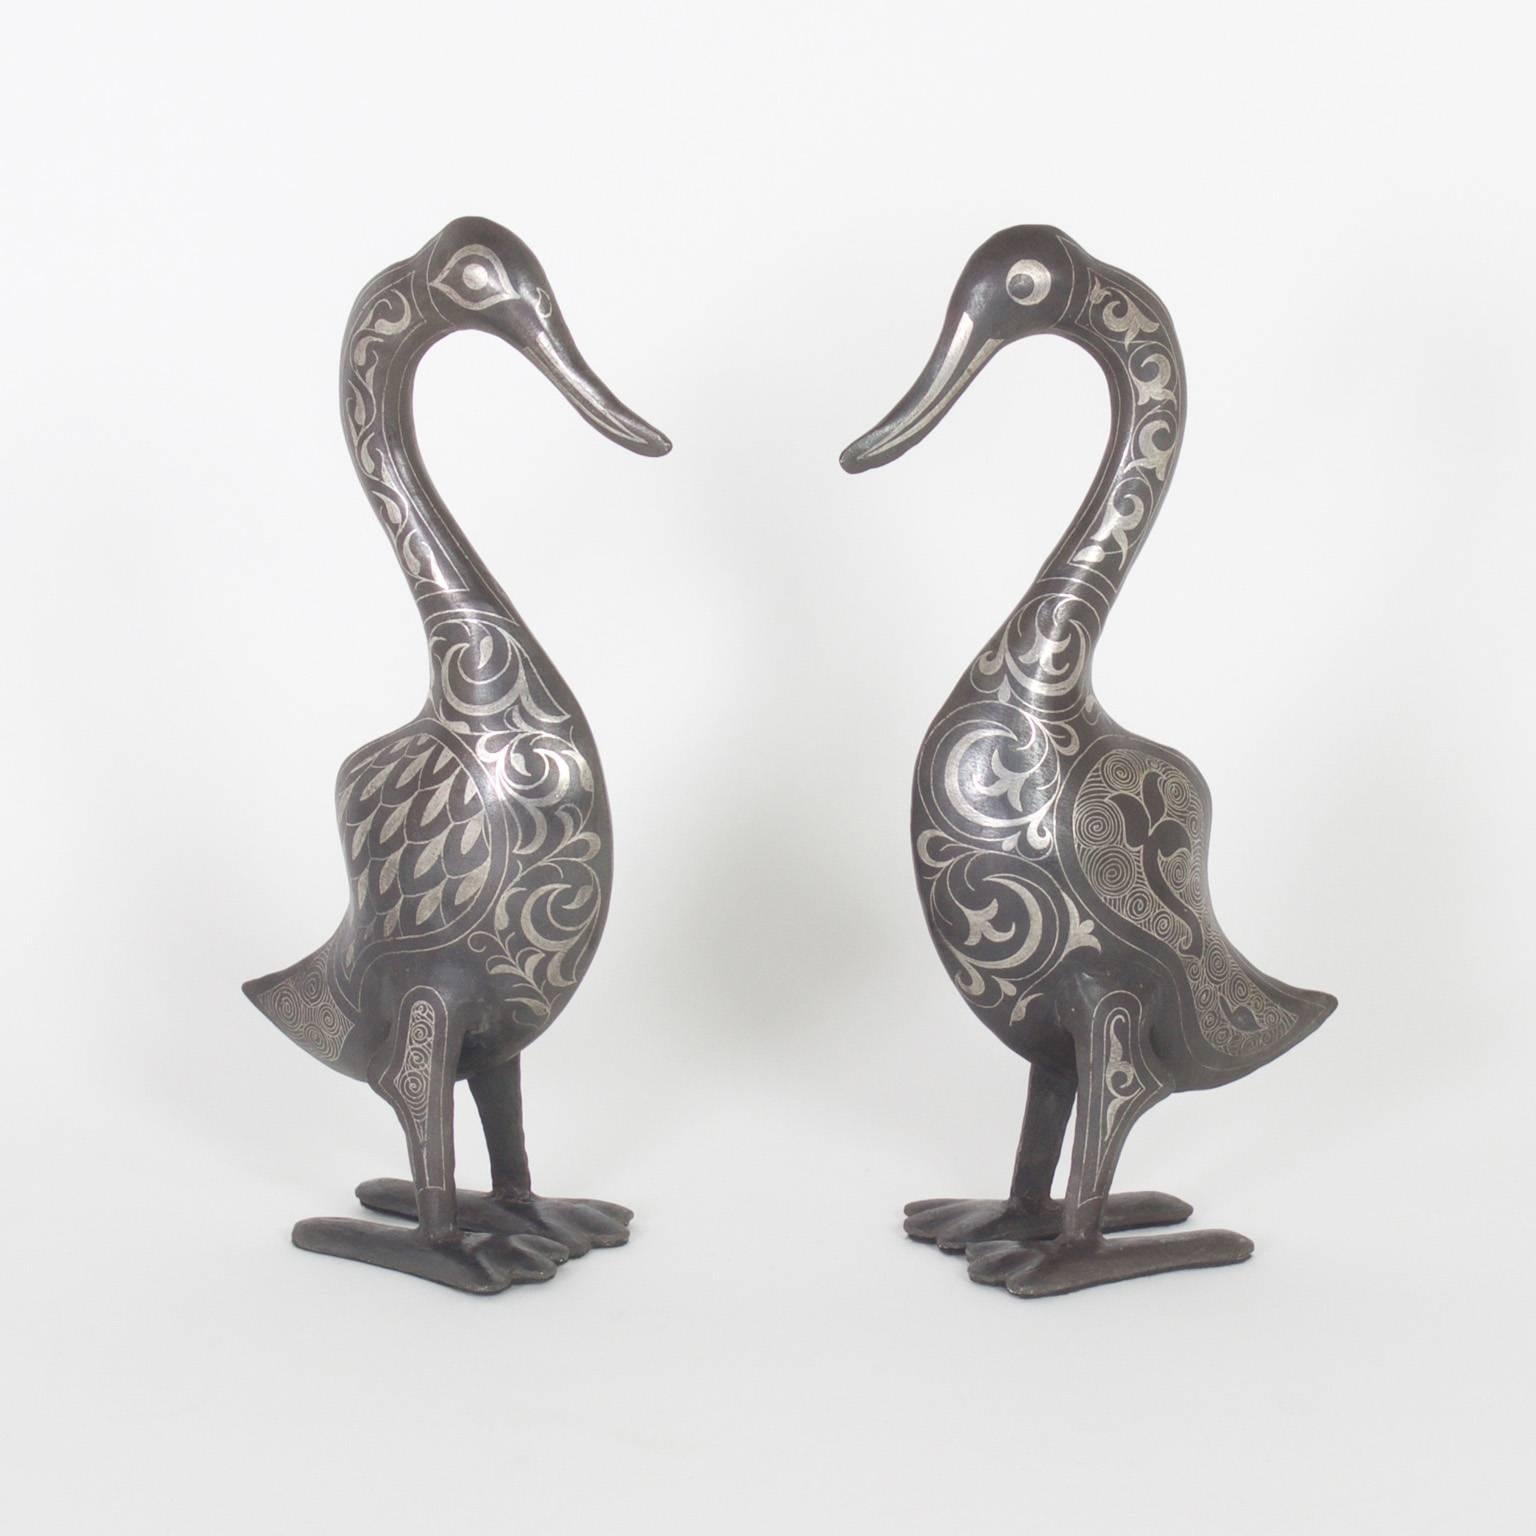 Amusing pair of Mid-Century Moroccan ducks crafted with an unconventional and ancient technique of applied silver on darker metal with a rustic patina. The combination of tones is quite alluring.